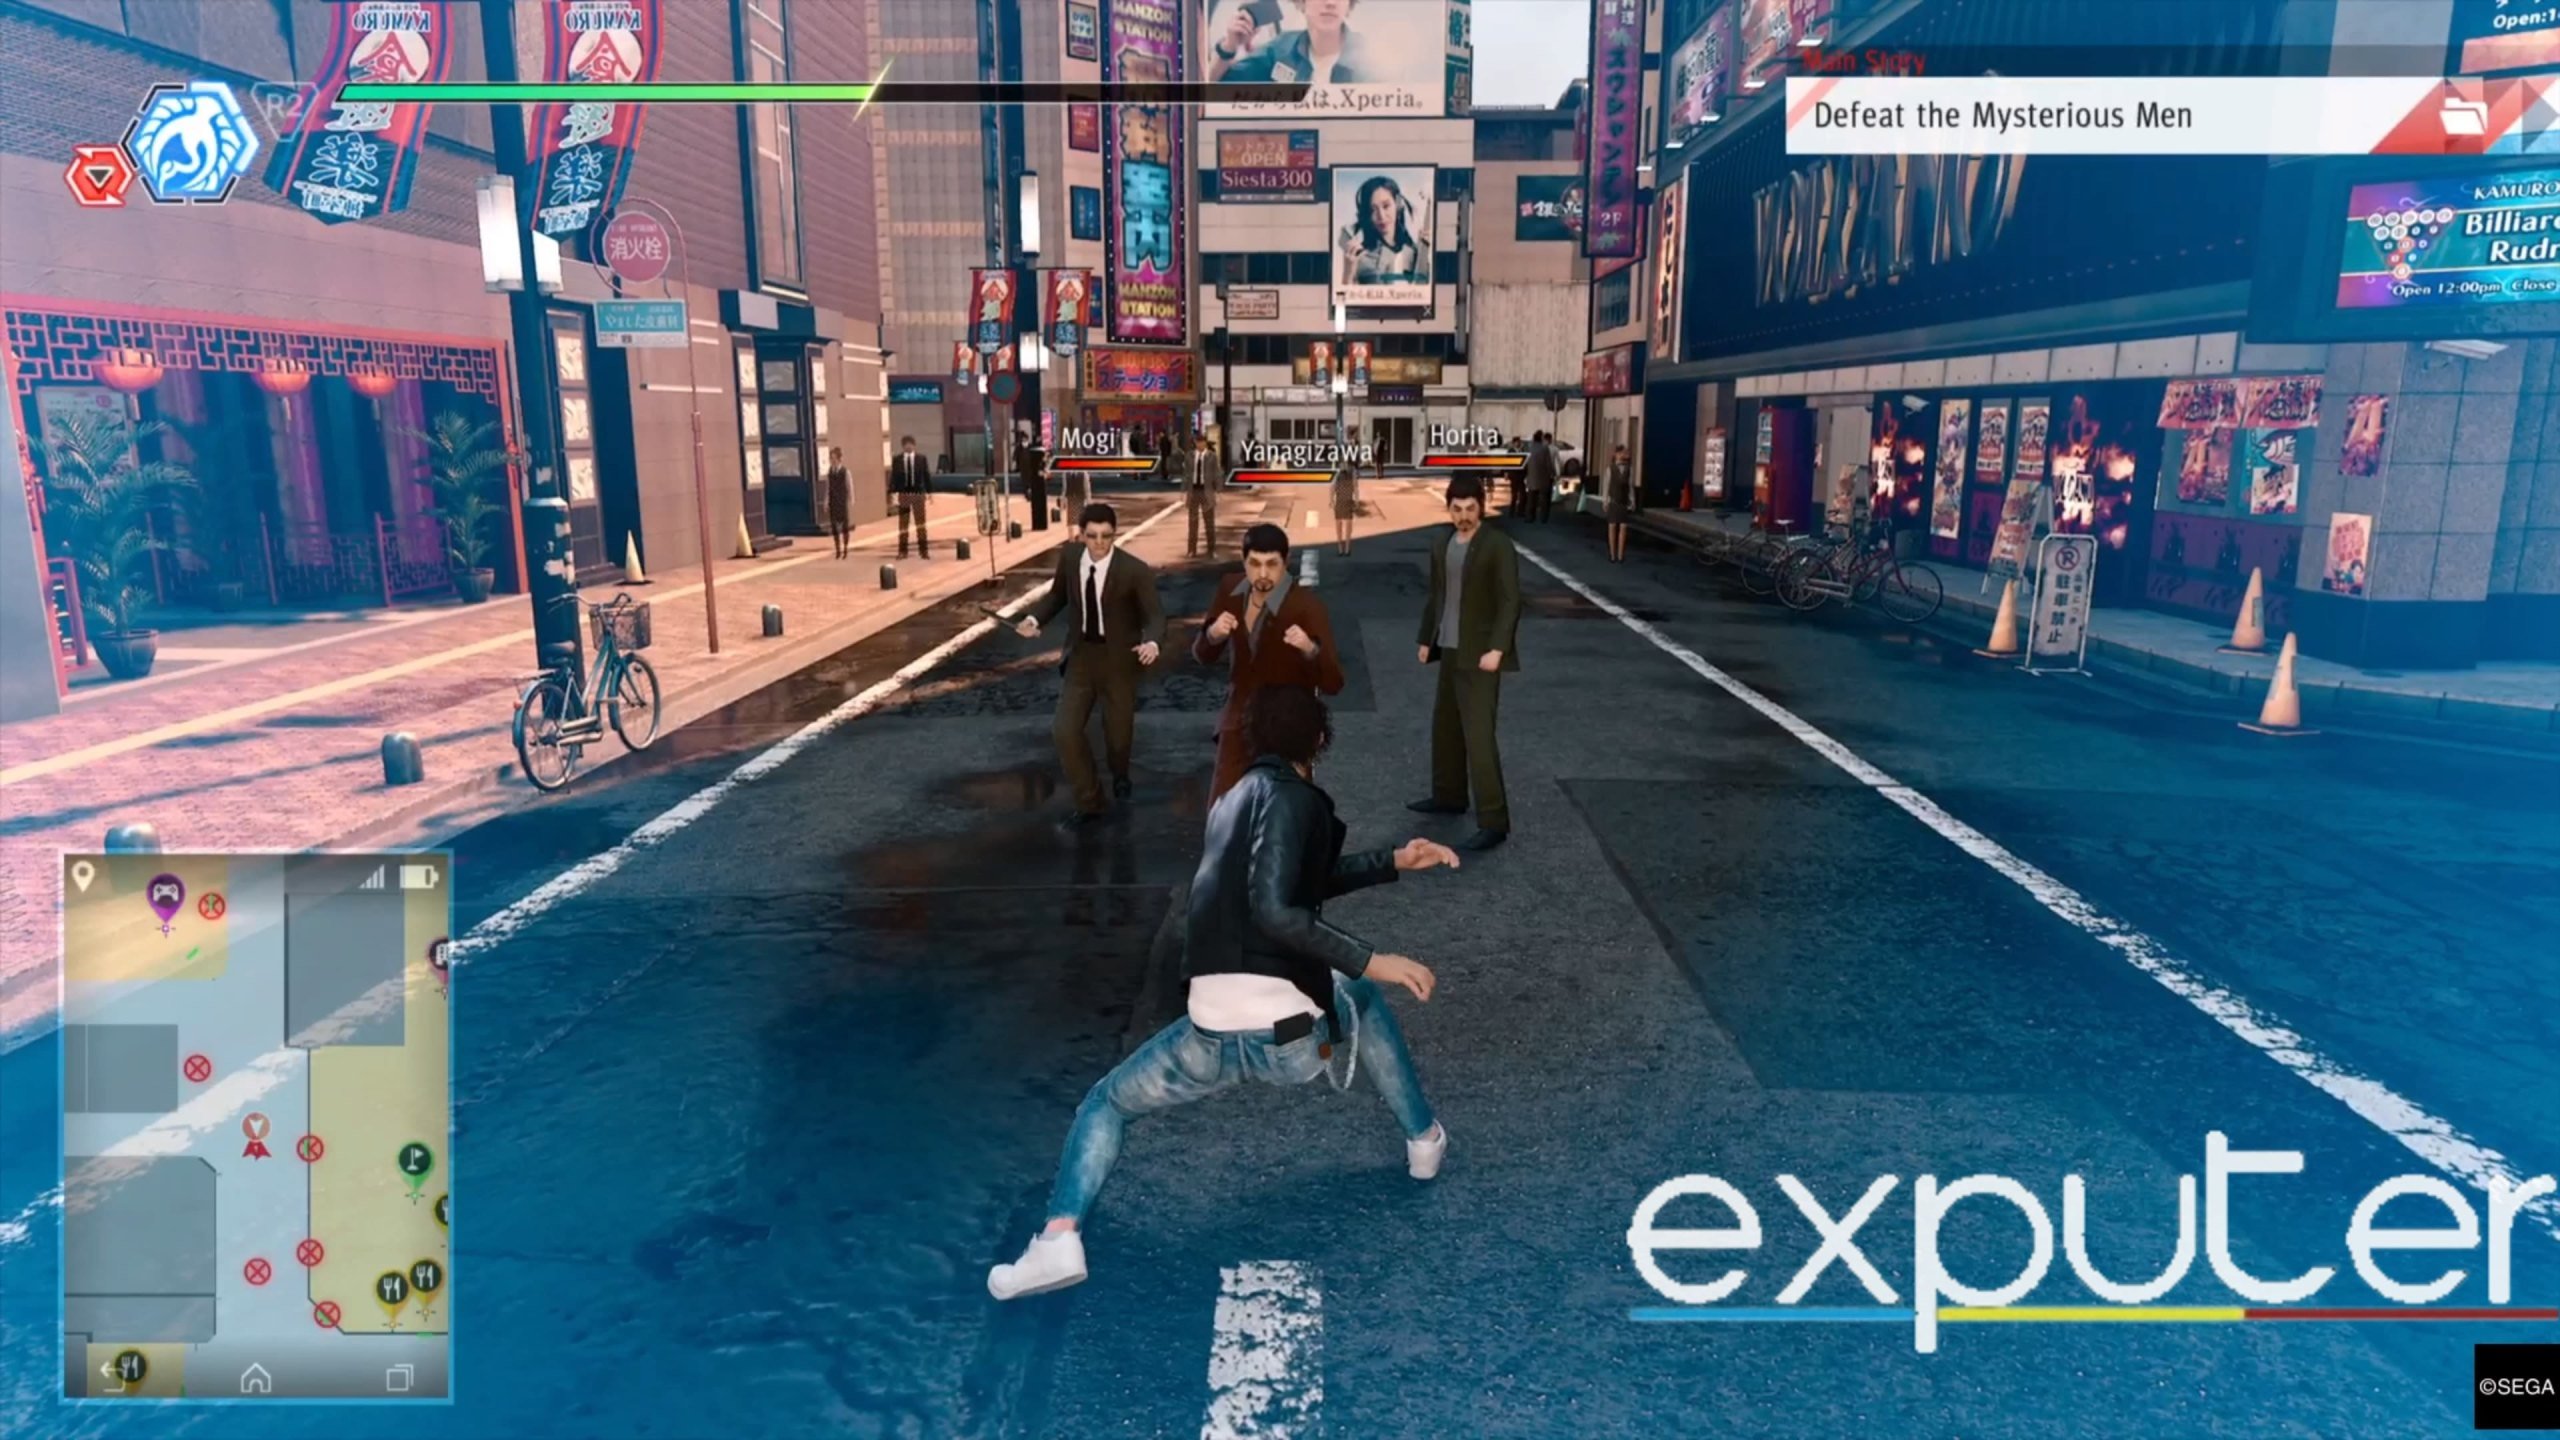 gameplay in judgment